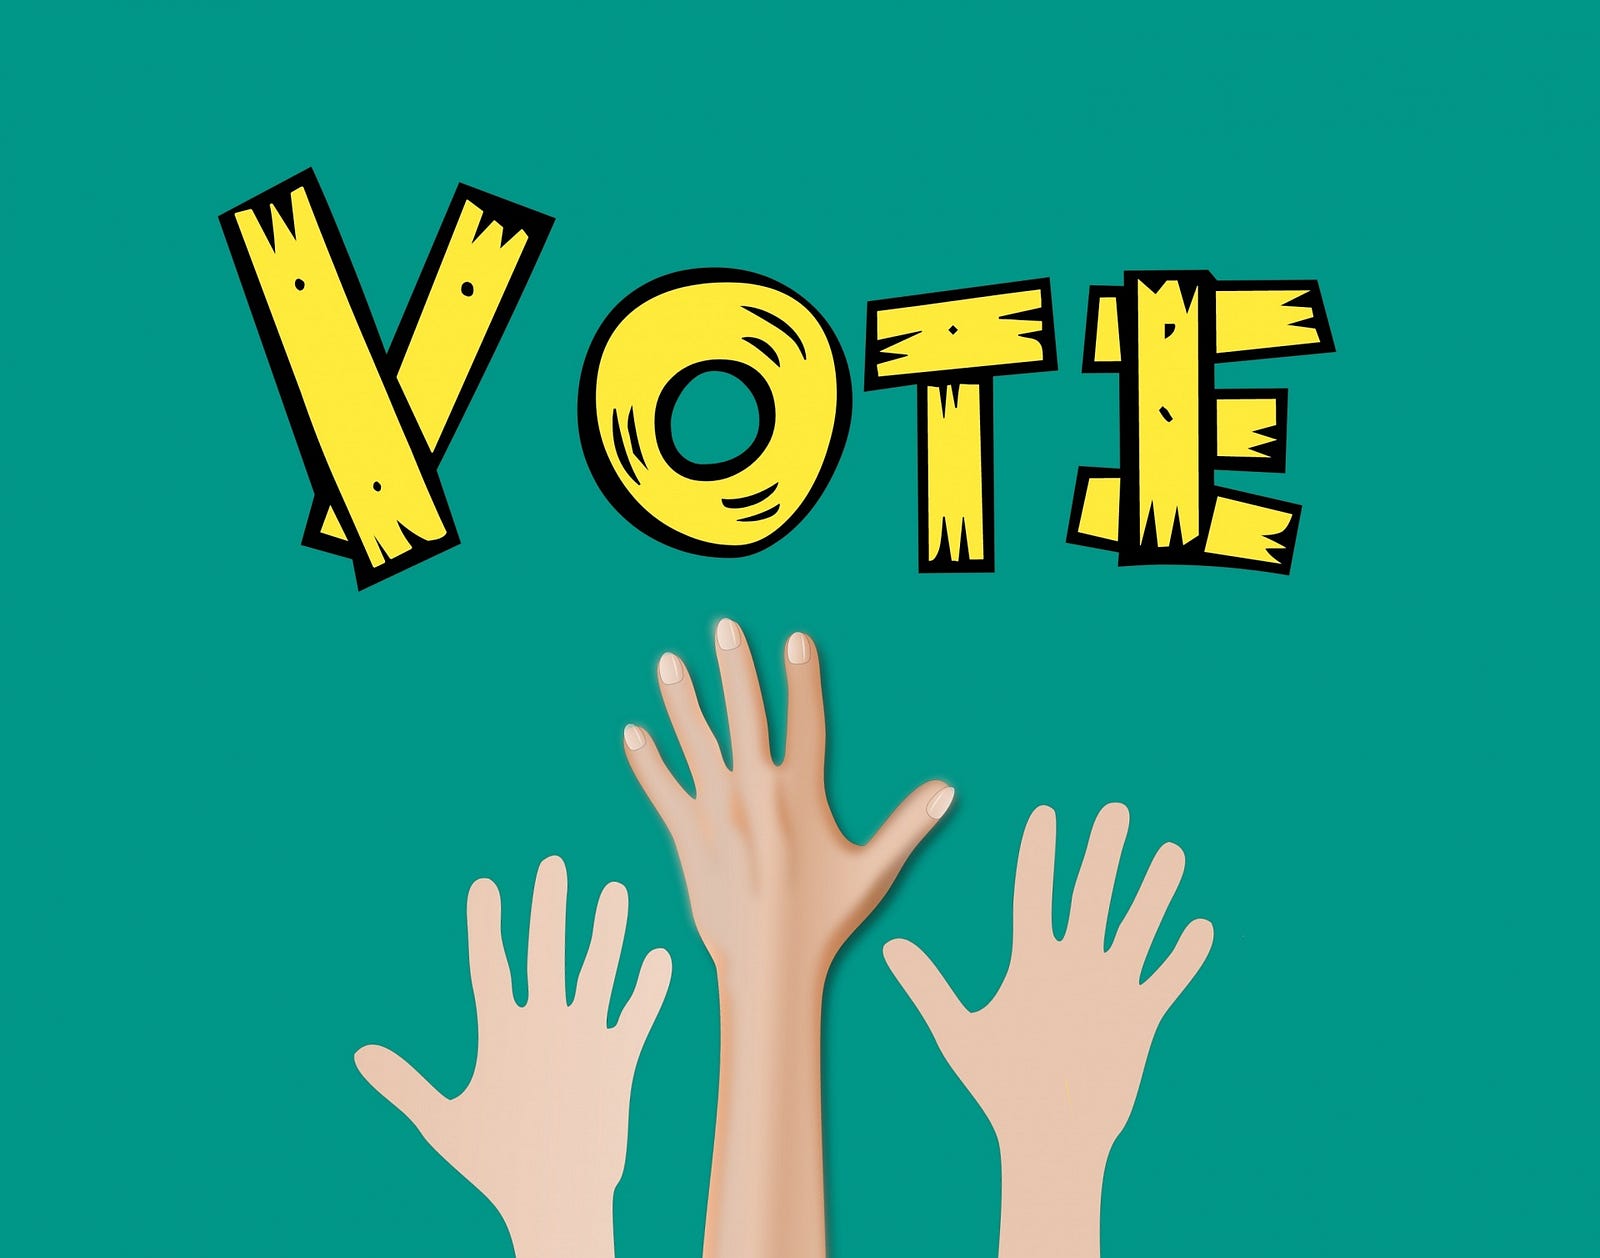 Image of “Vote” with three hands of different color shades reaching up toward it. Public domain image via Mohamed Hassan.